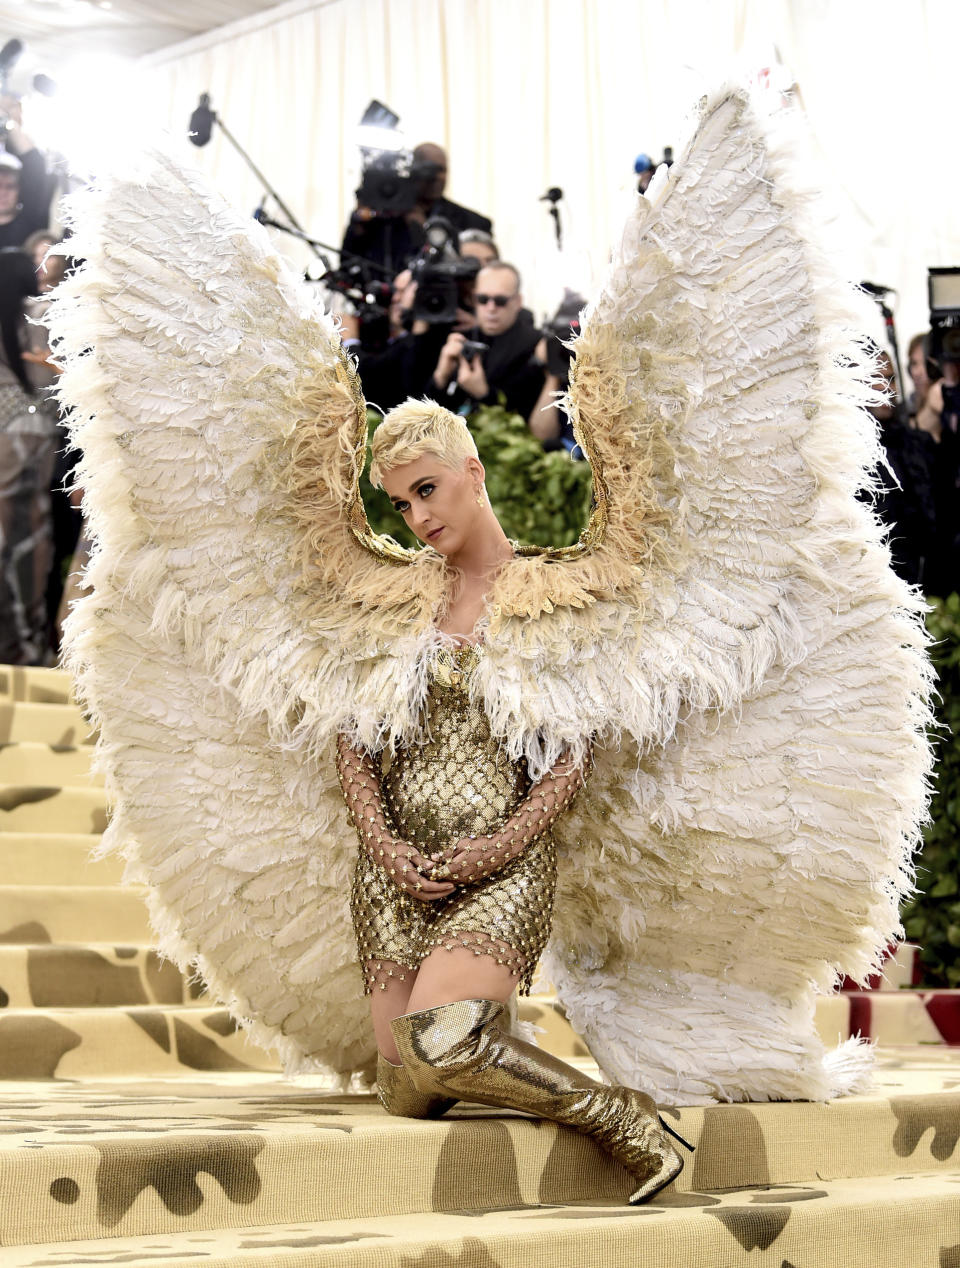 FILE - In this May 7, 2018 file photo, singer Katy Perry wears angel wings at The Metropolitan Museum of Art's Costume Institute benefit gala celebrating the opening of the Heavenly Bodies: Fashion and the Catholic Imagination exhibition in New York. (Photo by Evan Agostini/Invision/AP, File)